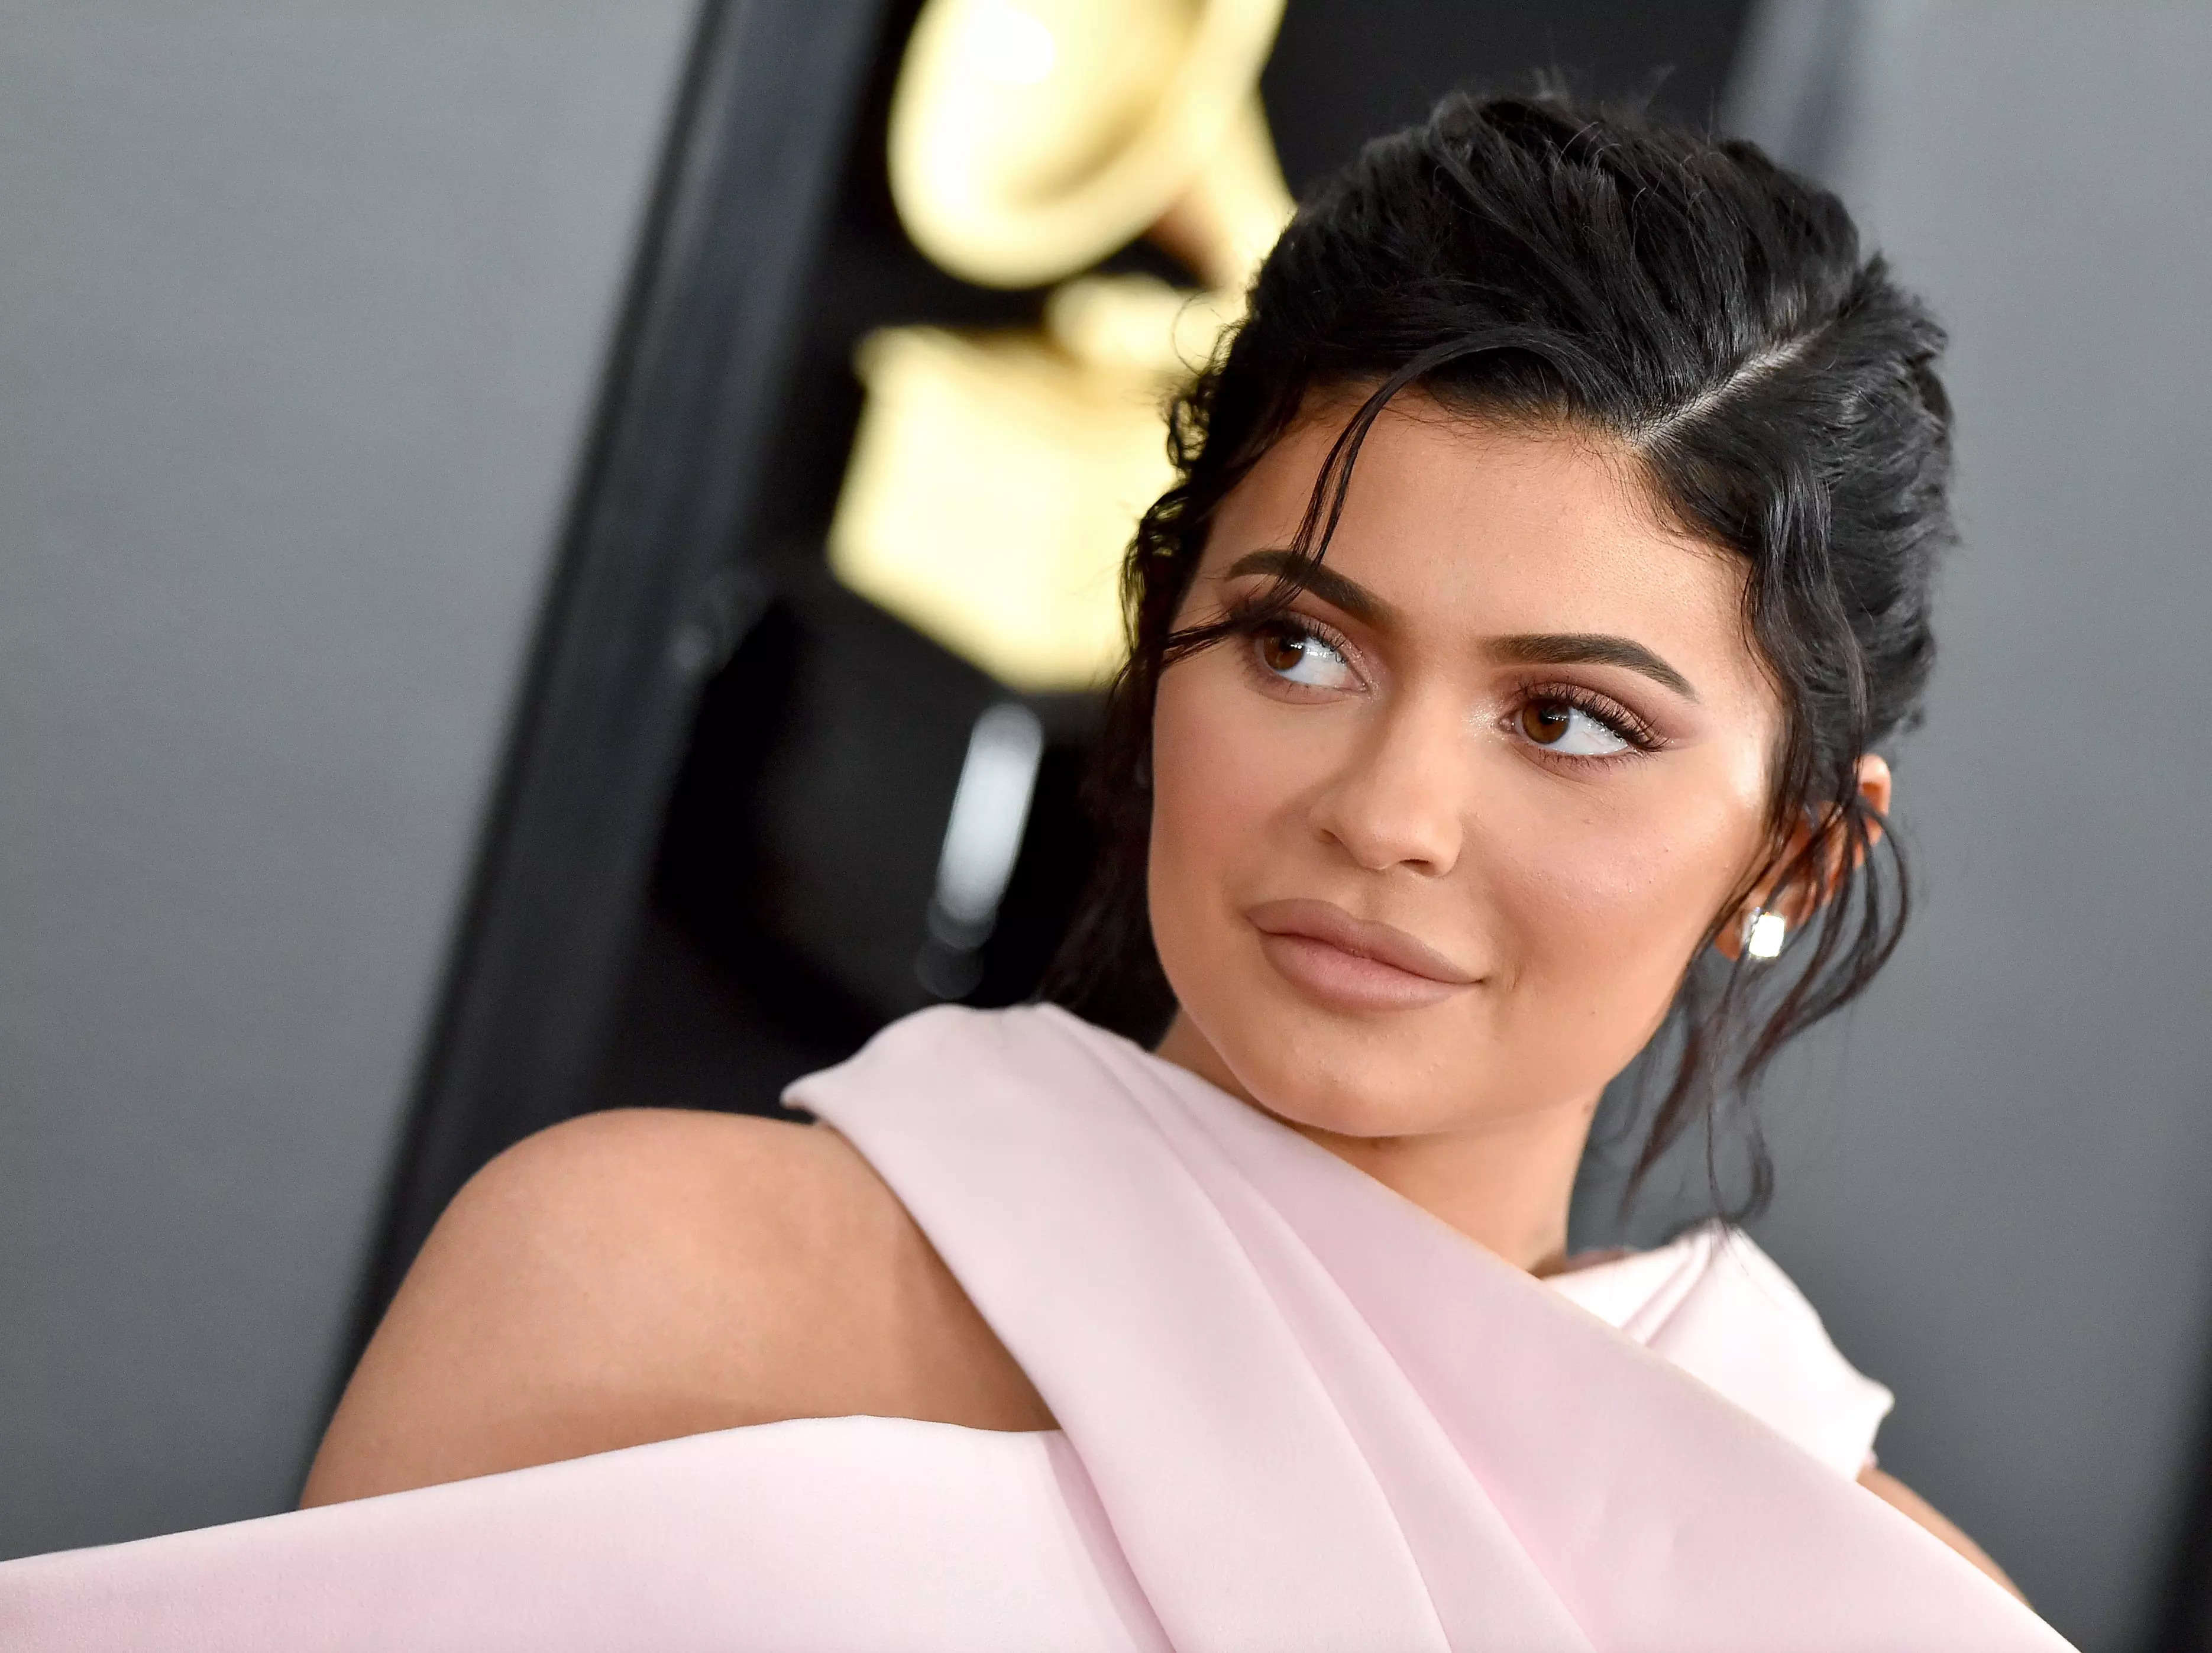 Kylie Jenner Wore A Naked Bikini With Nipples Printed On It To Make A Statement On Instagram 